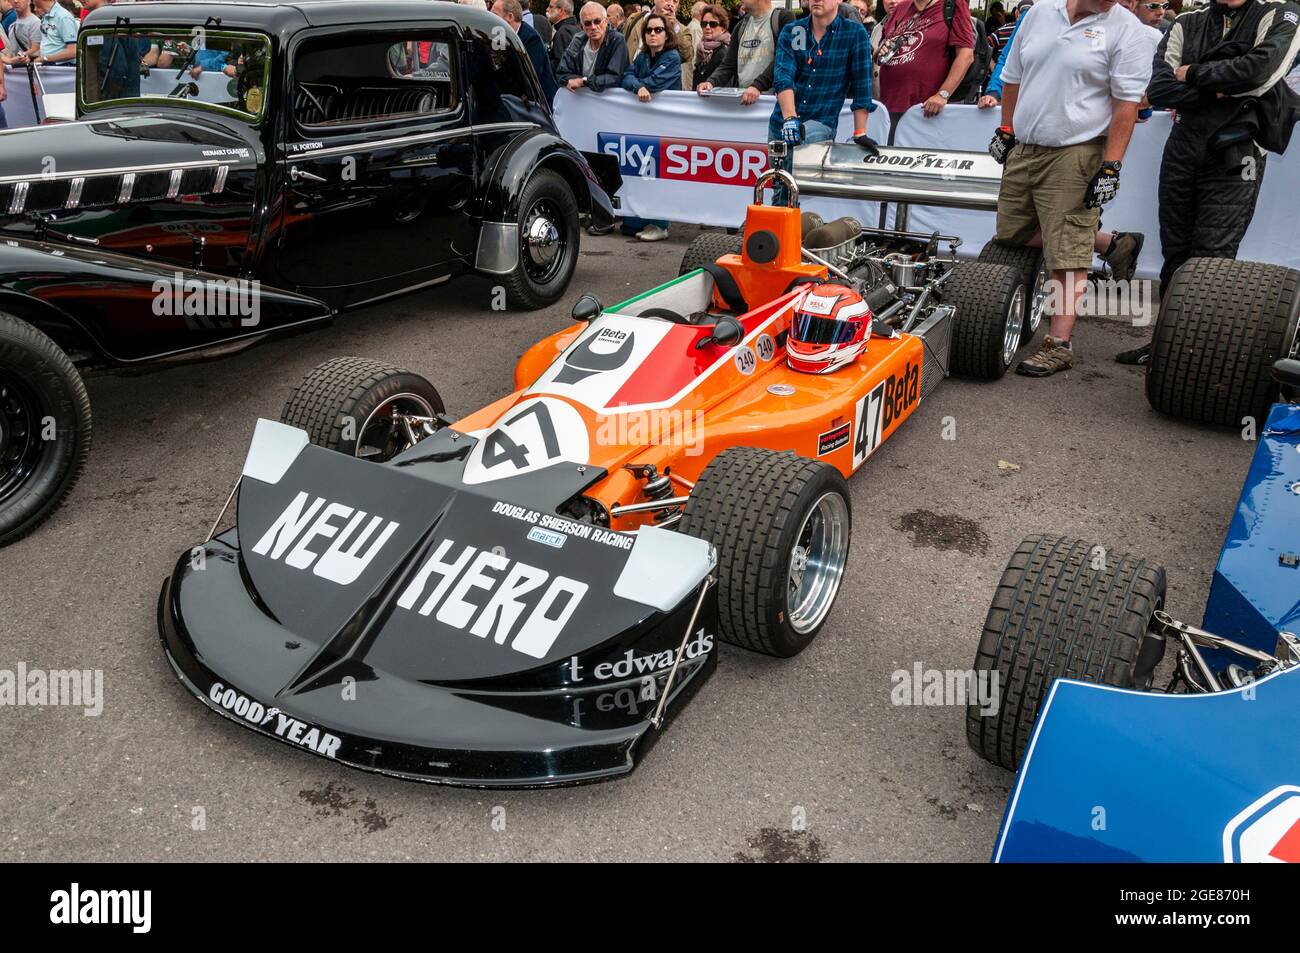 March 2-4-0 experimental six-wheeled Formula One racing car built by March Engineering at the Goodwood Festival of Speed motor racing event Stock Photo